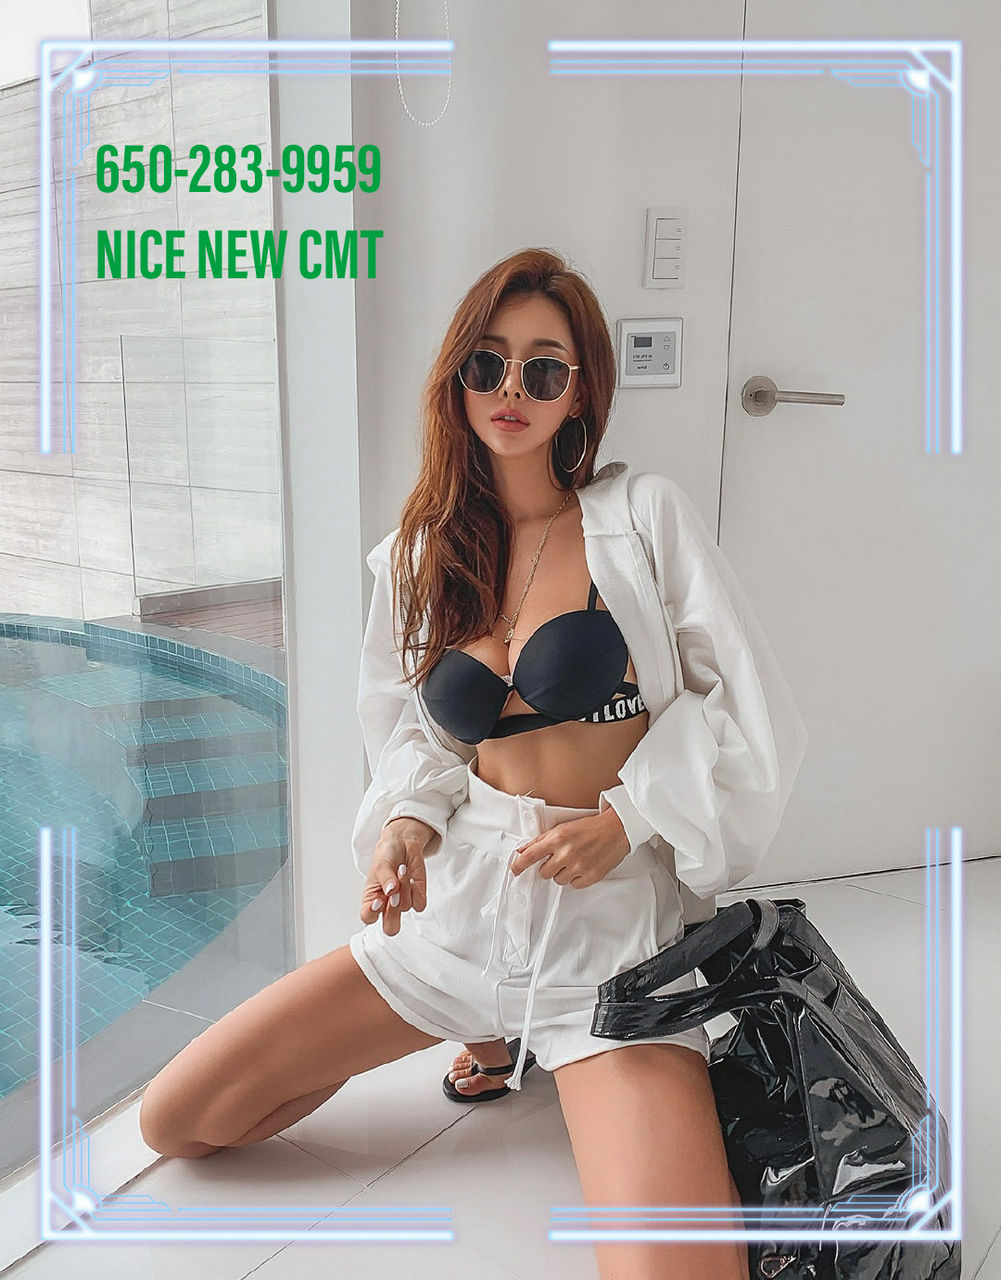 Escorts San Mateo, California 🌅🌈🔵🌅 Clean room🌅NEW Charming CMT🧡🌈🔵🌅Sweet smile and warm services 😋😋💜💜